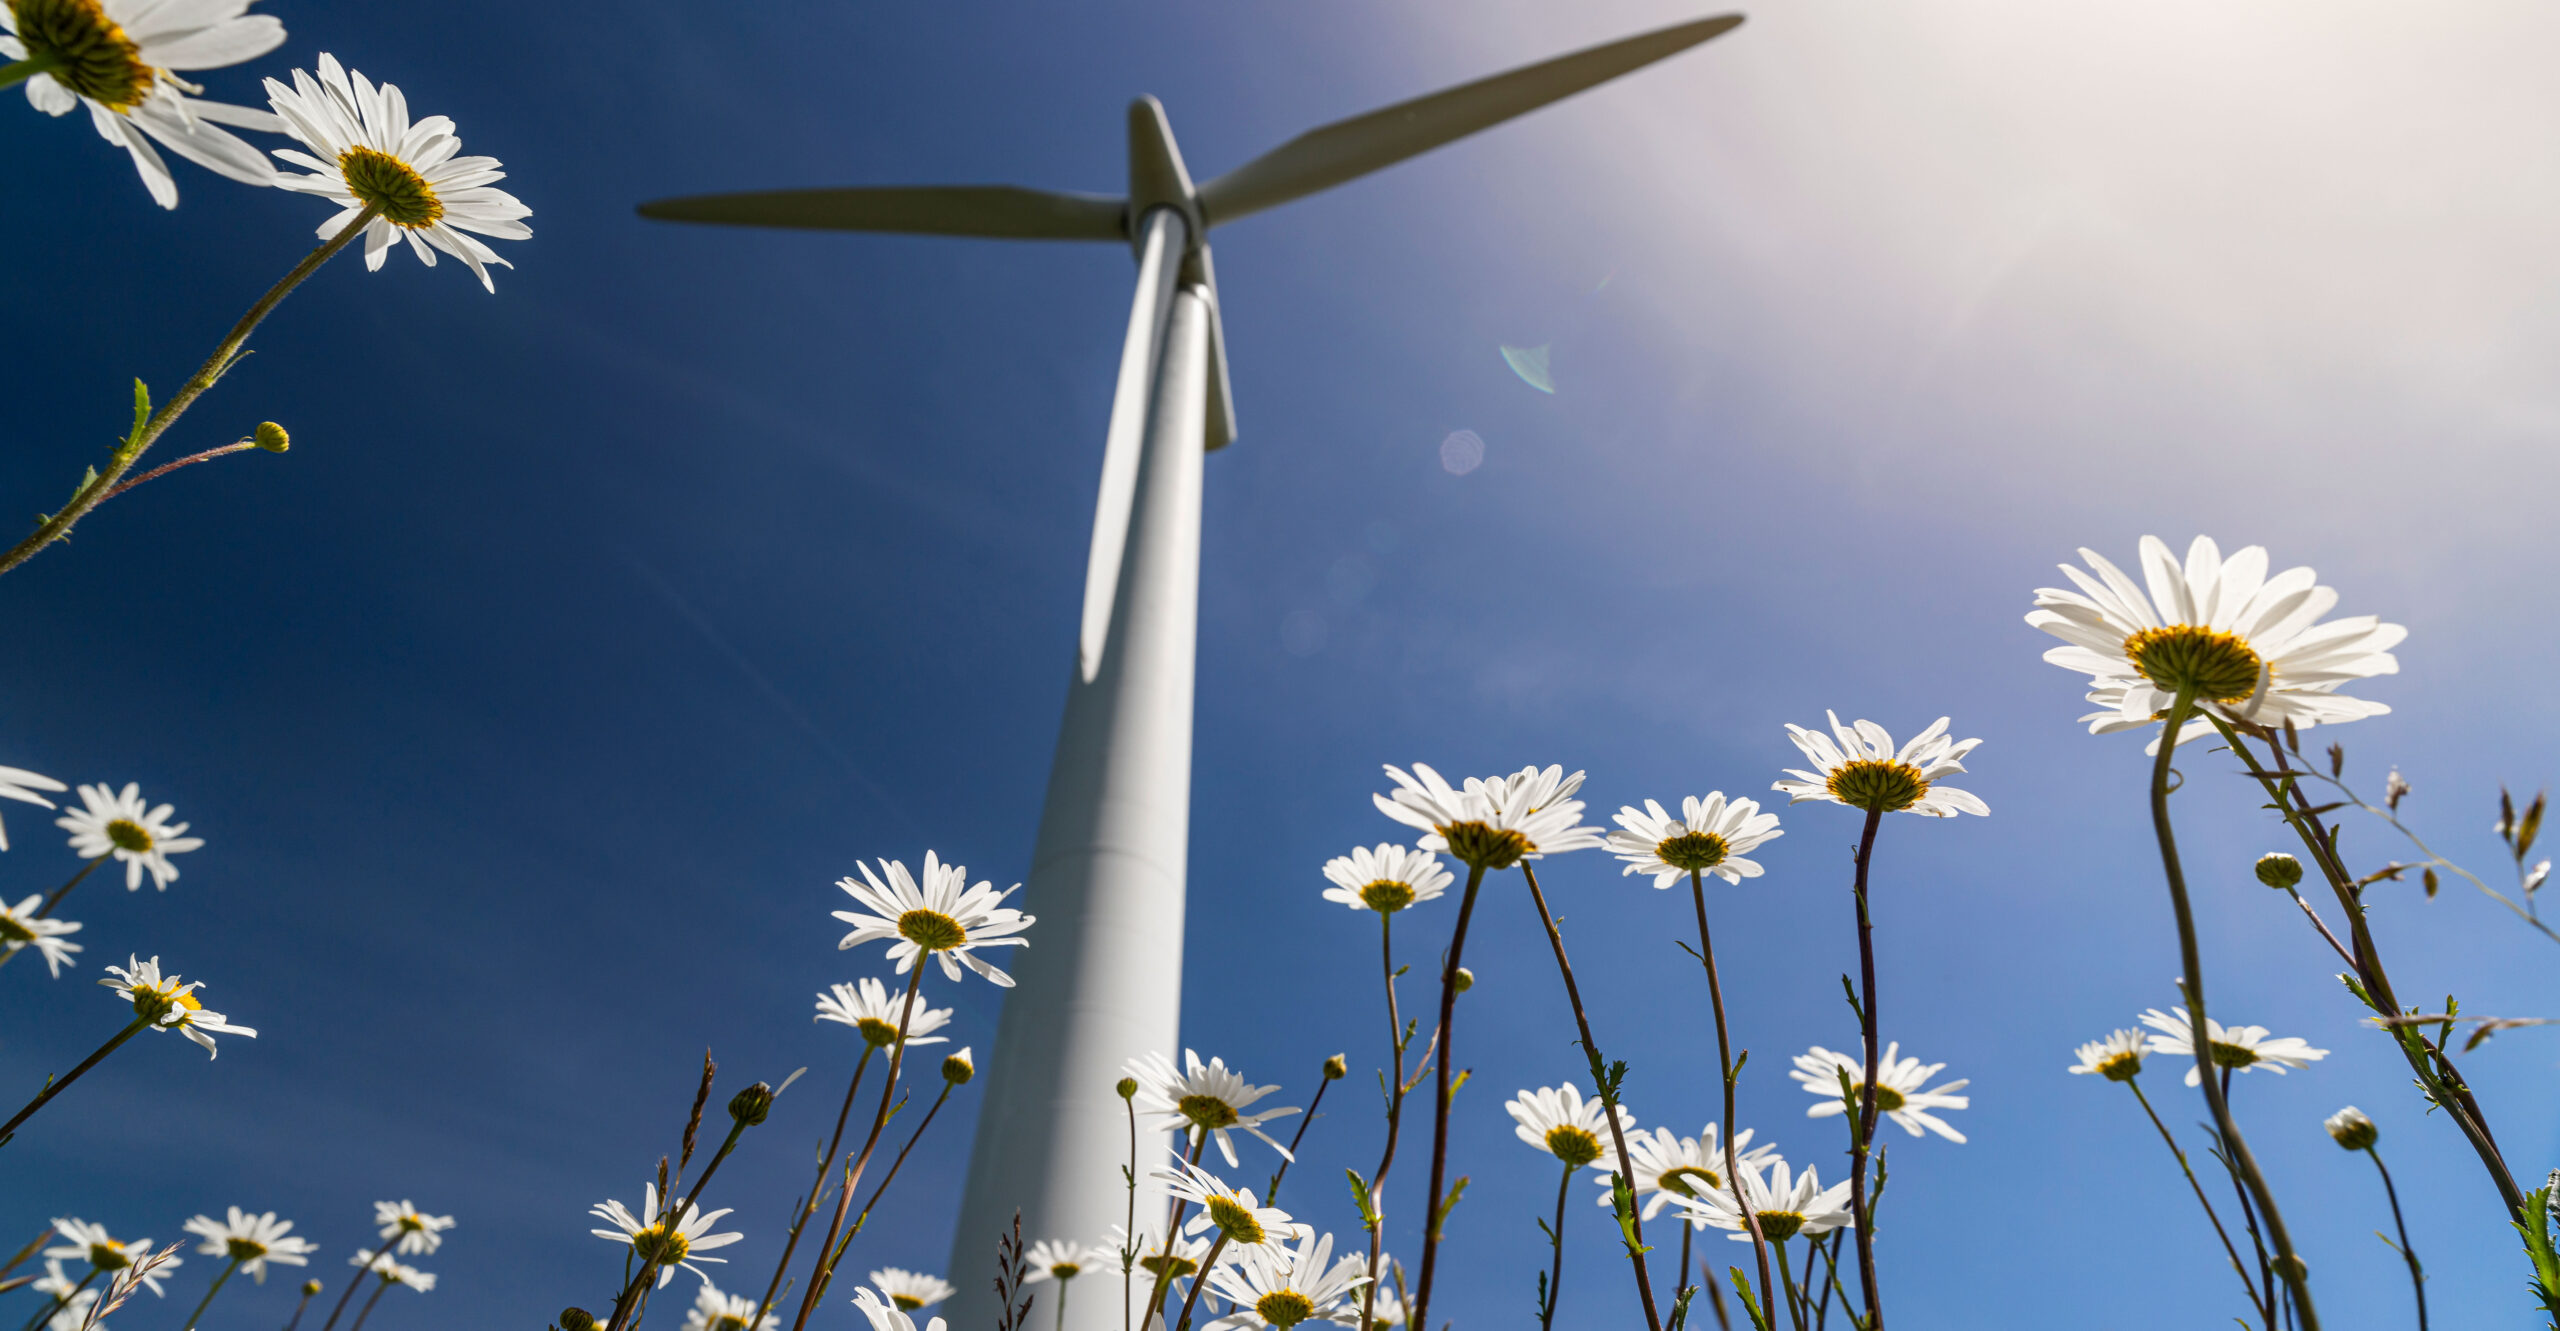 UK's Onshore Wind Scheme Could Backfire, With Far More Potent Greenhouse Gas Emissions 